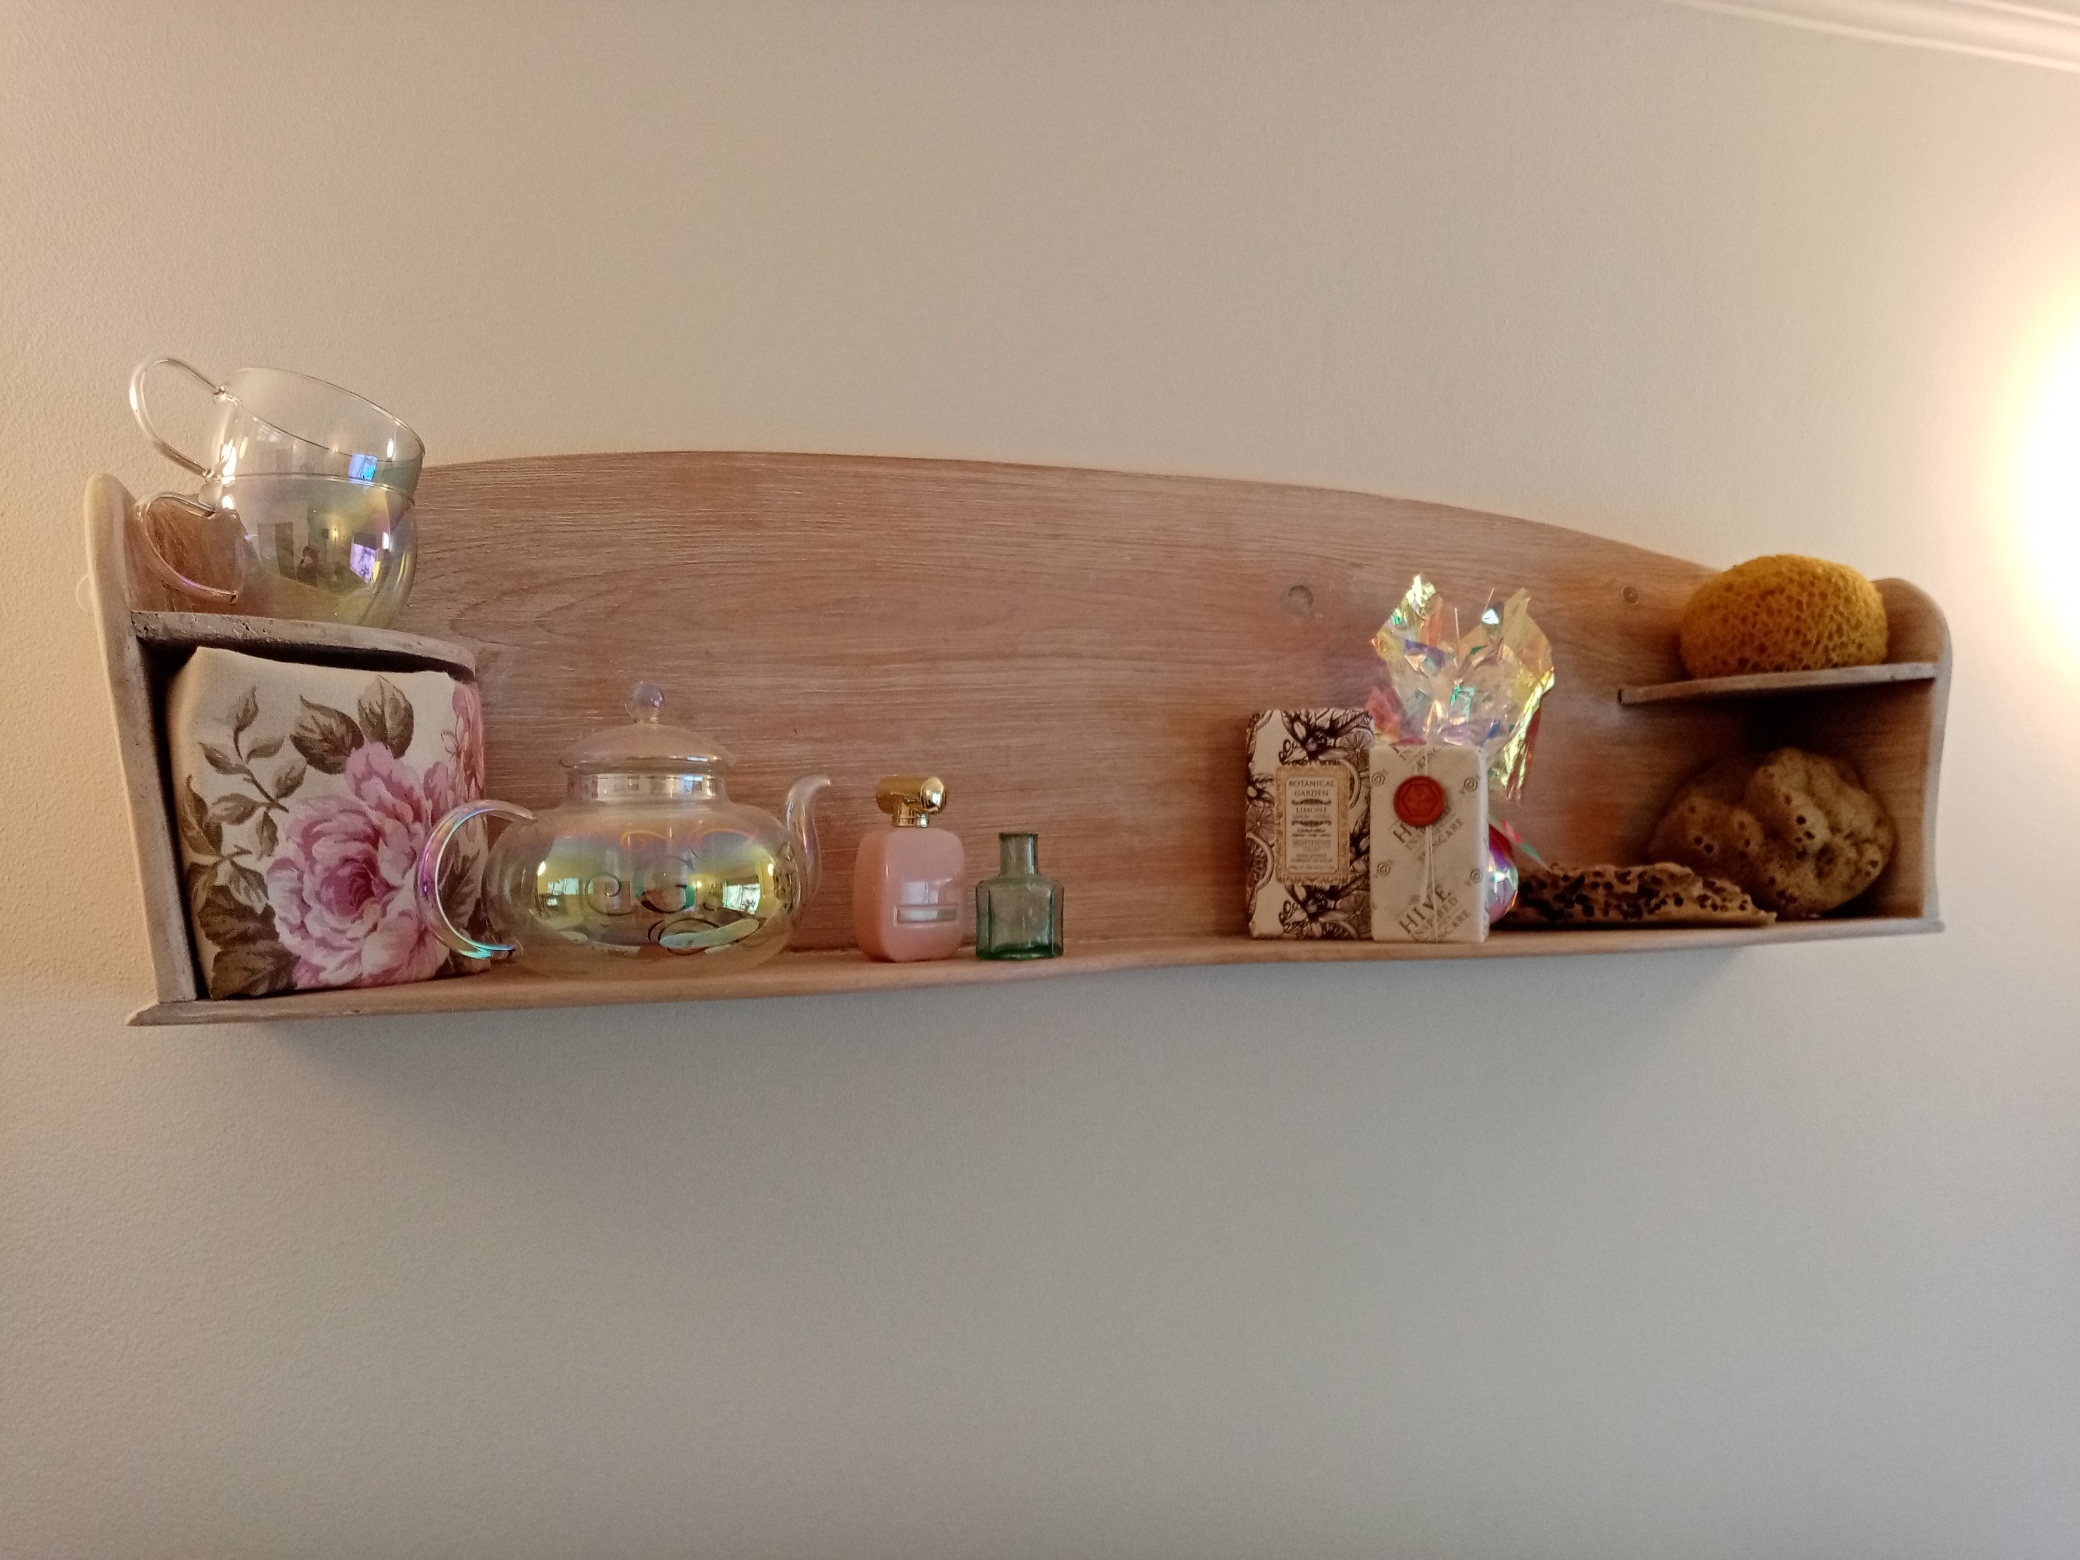 Pretty decorative bathroom shelf designed by Paint and Plan